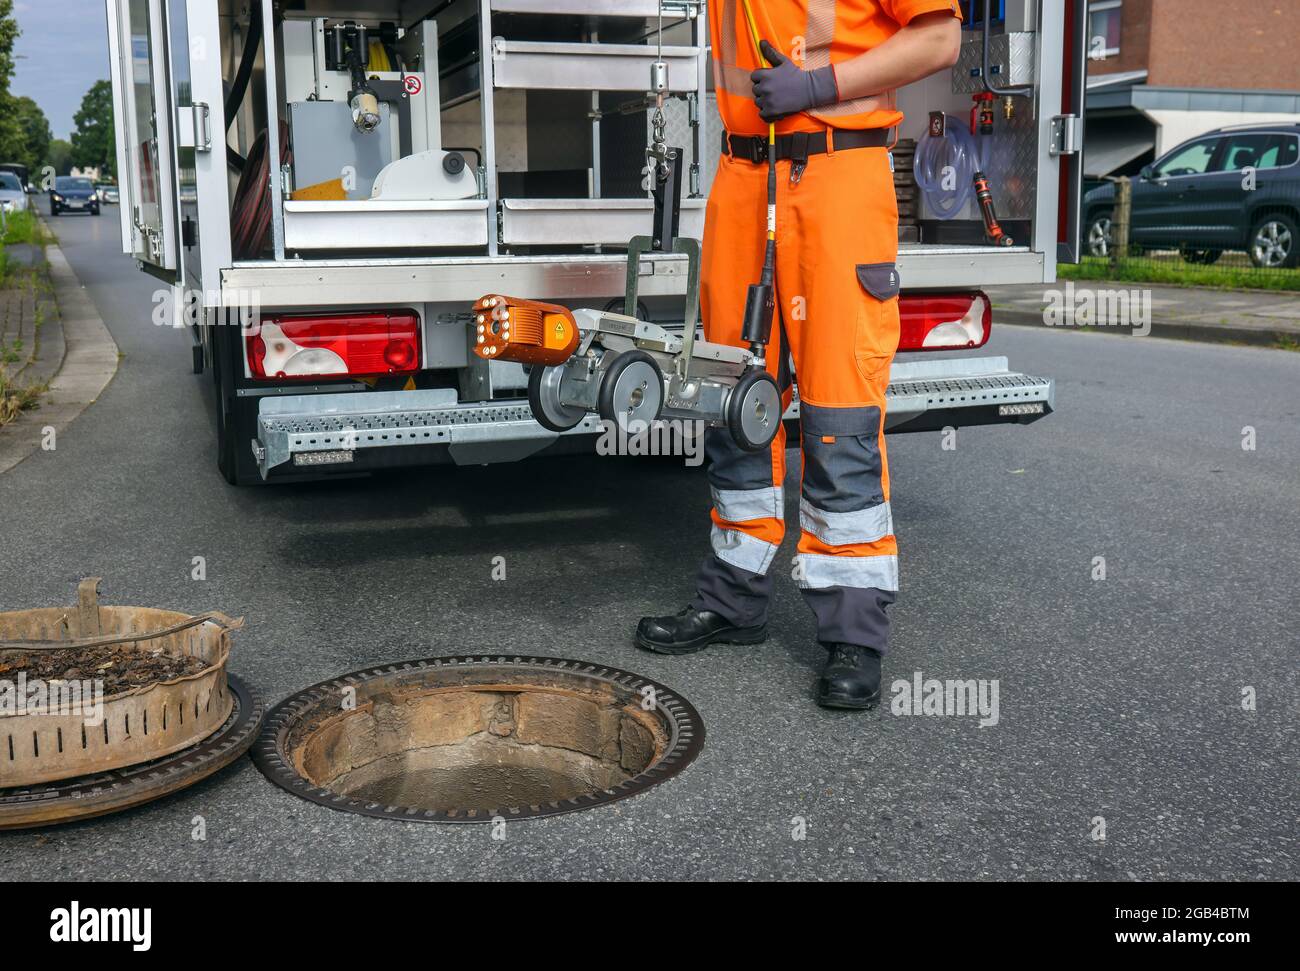 Hamm, North Rhine-Westphalia, Germany - TV sewer inspection vehicle, sewer inspection by camera, a trainee, a specialist for pipe, sewer and industria Stock Photo